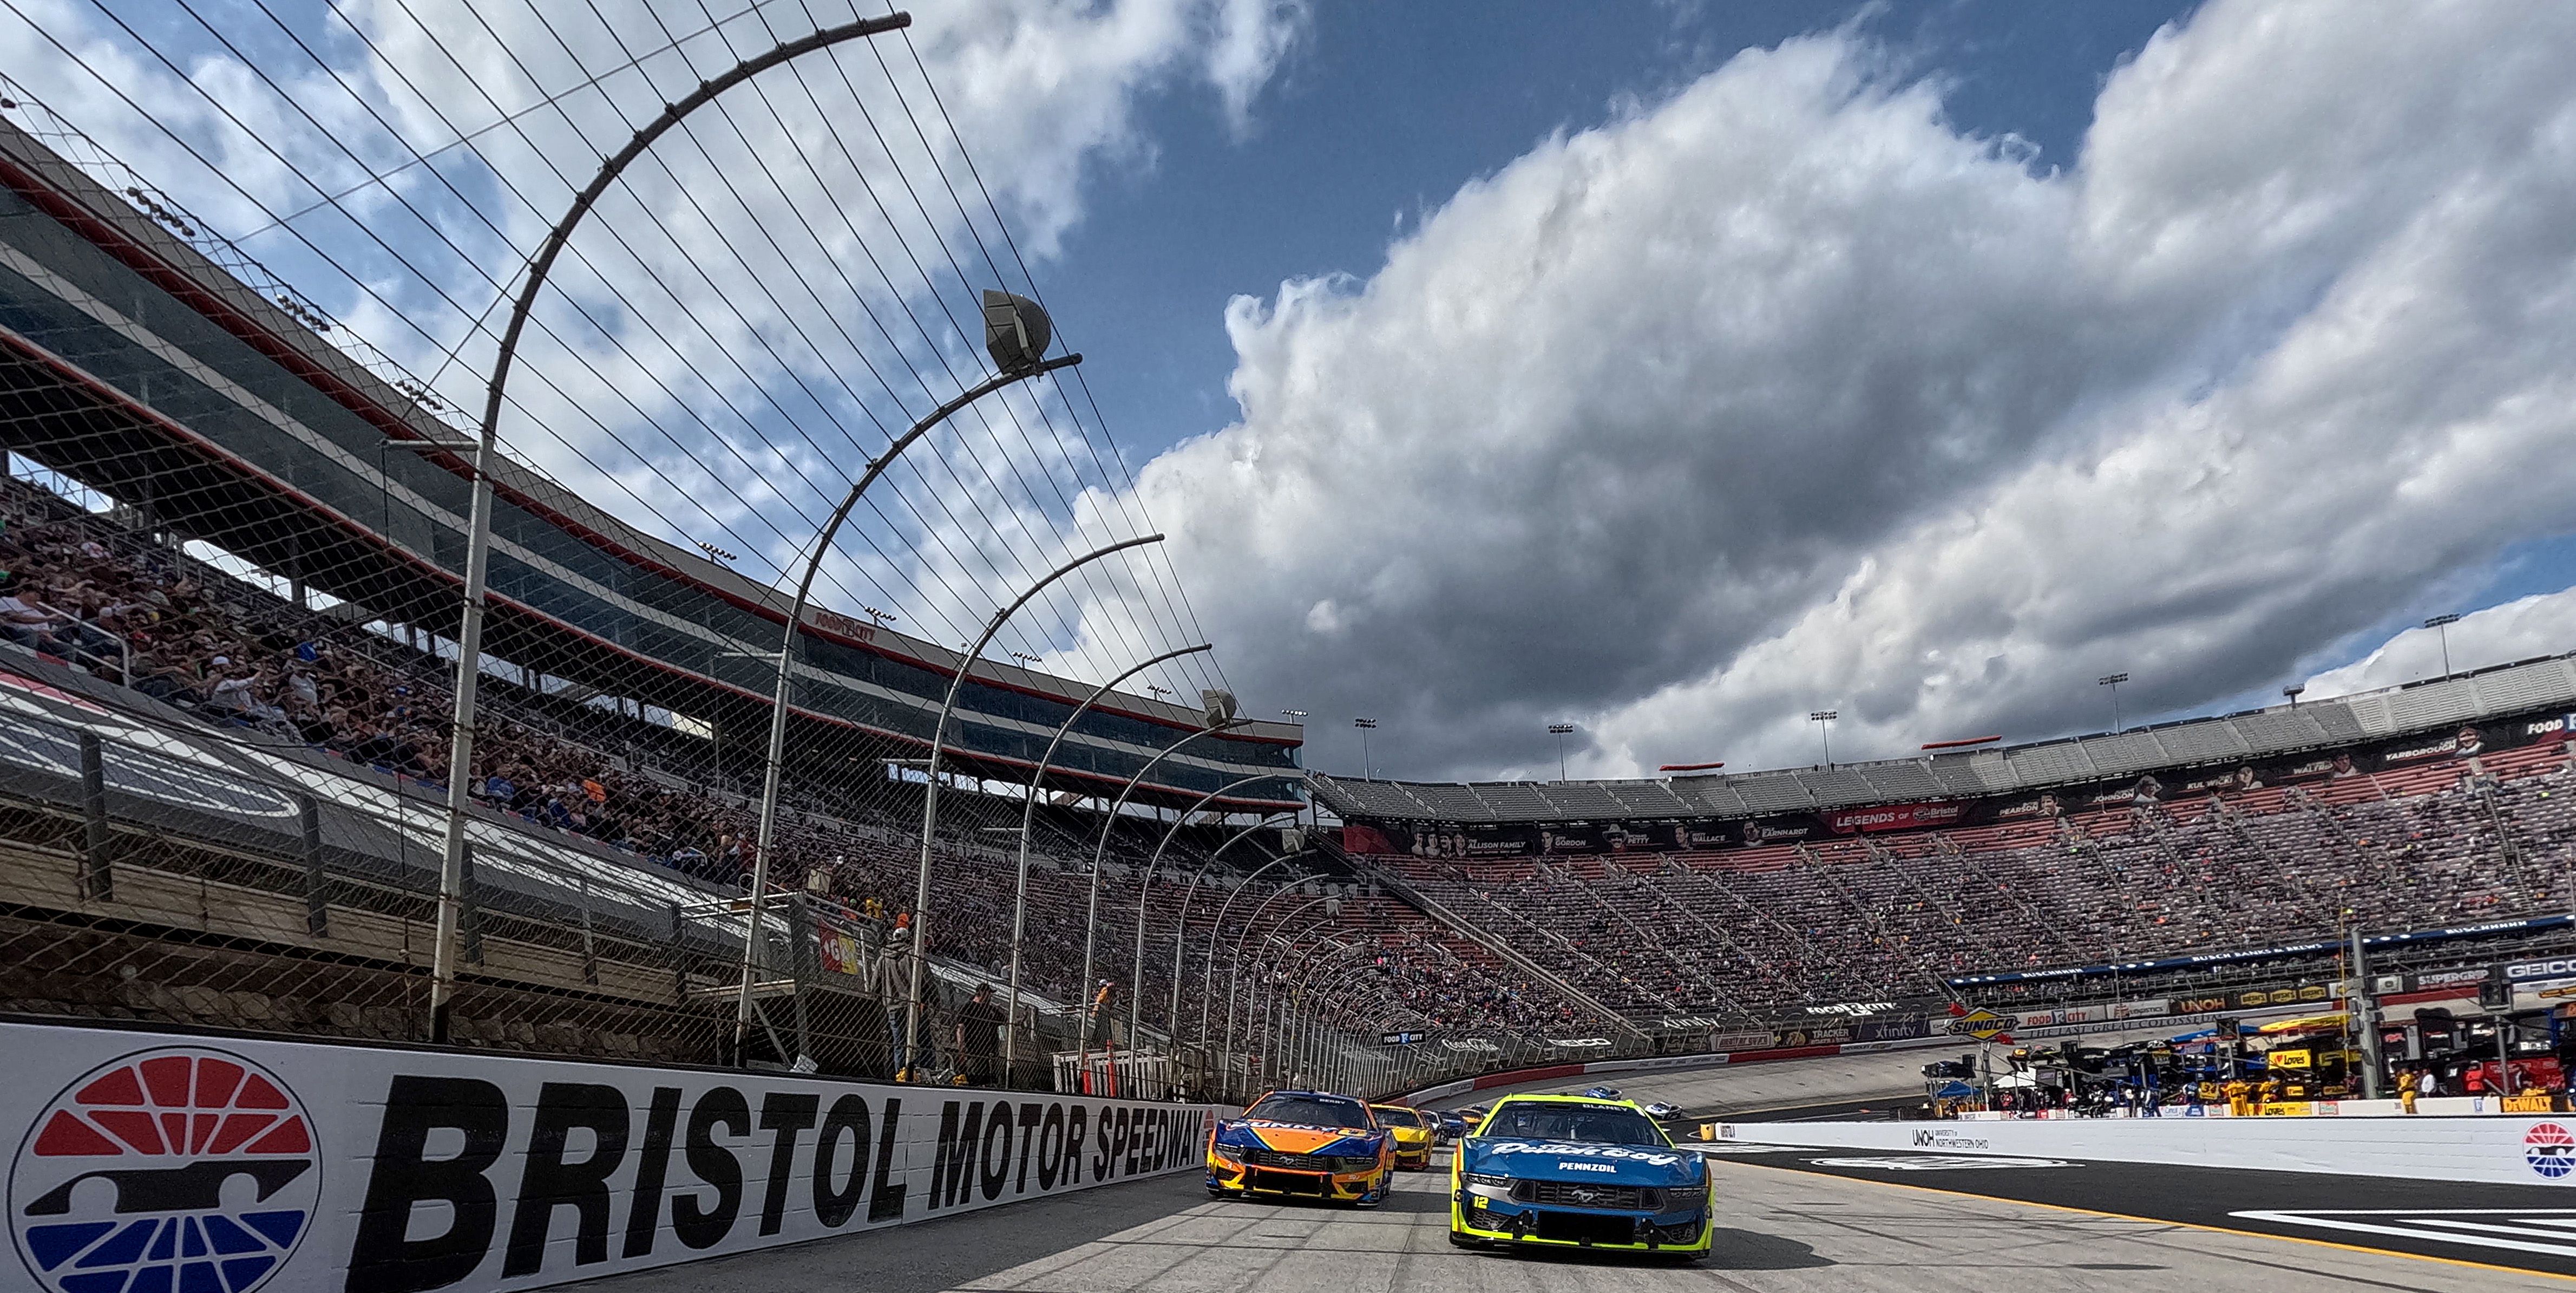 Bristol Motor Speedway Roasted Online Over Graphic Showing Racers Going Wrong Way